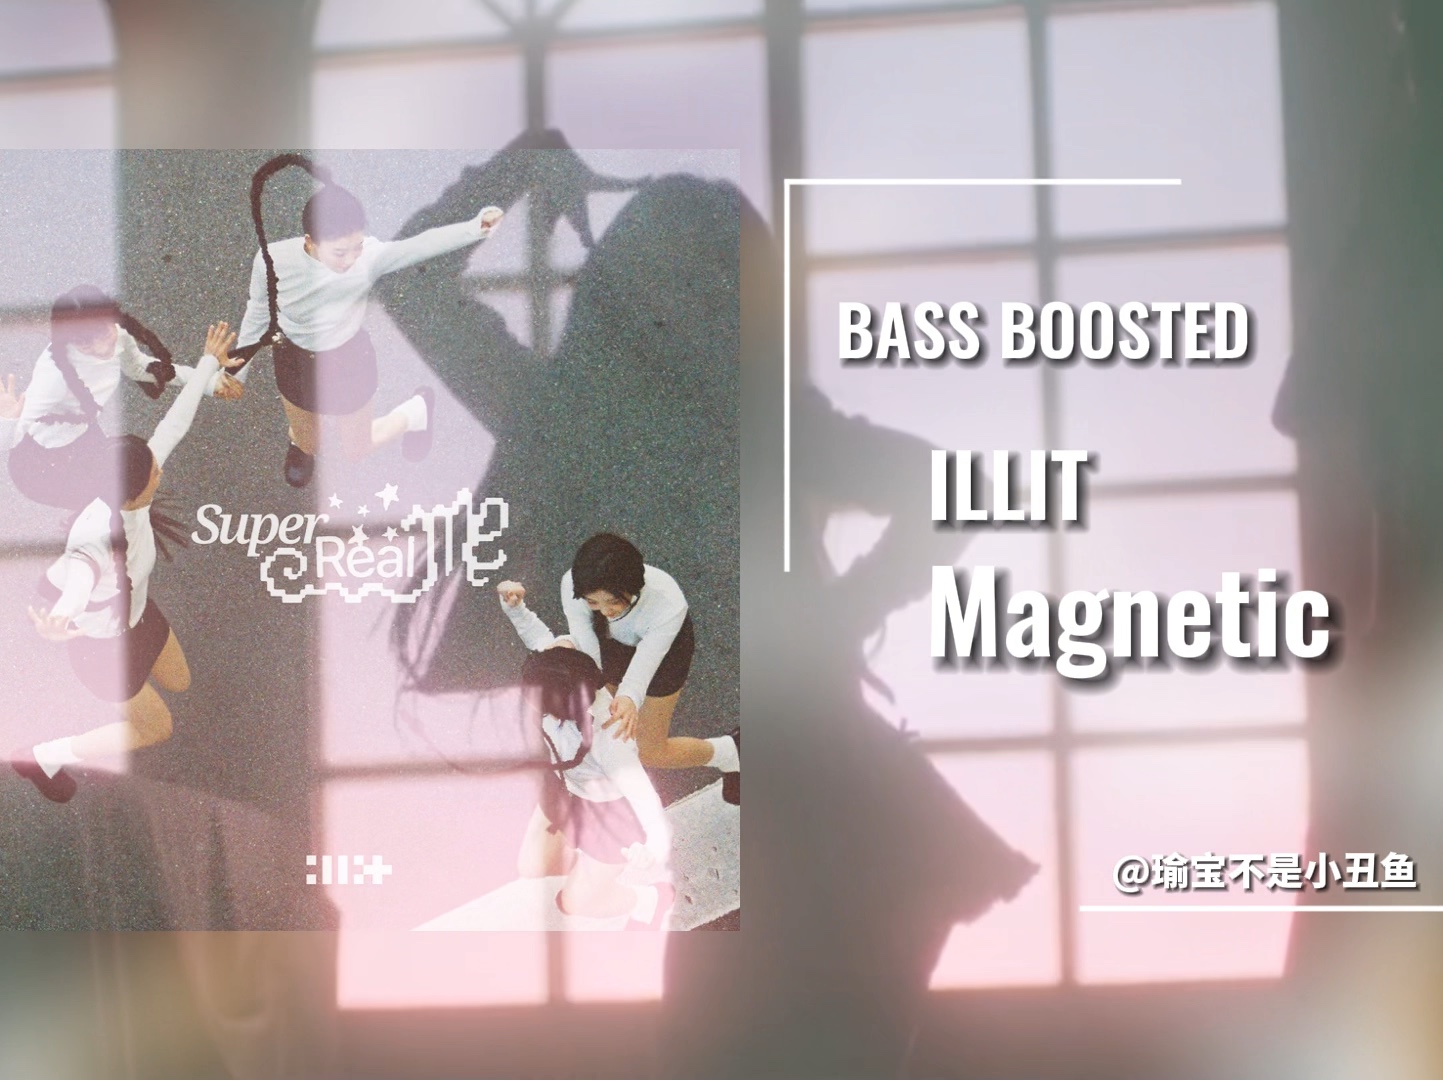 【Kpop重低音】ILLIT - Magnetic MV视听 重低音 BASS BOOSTED